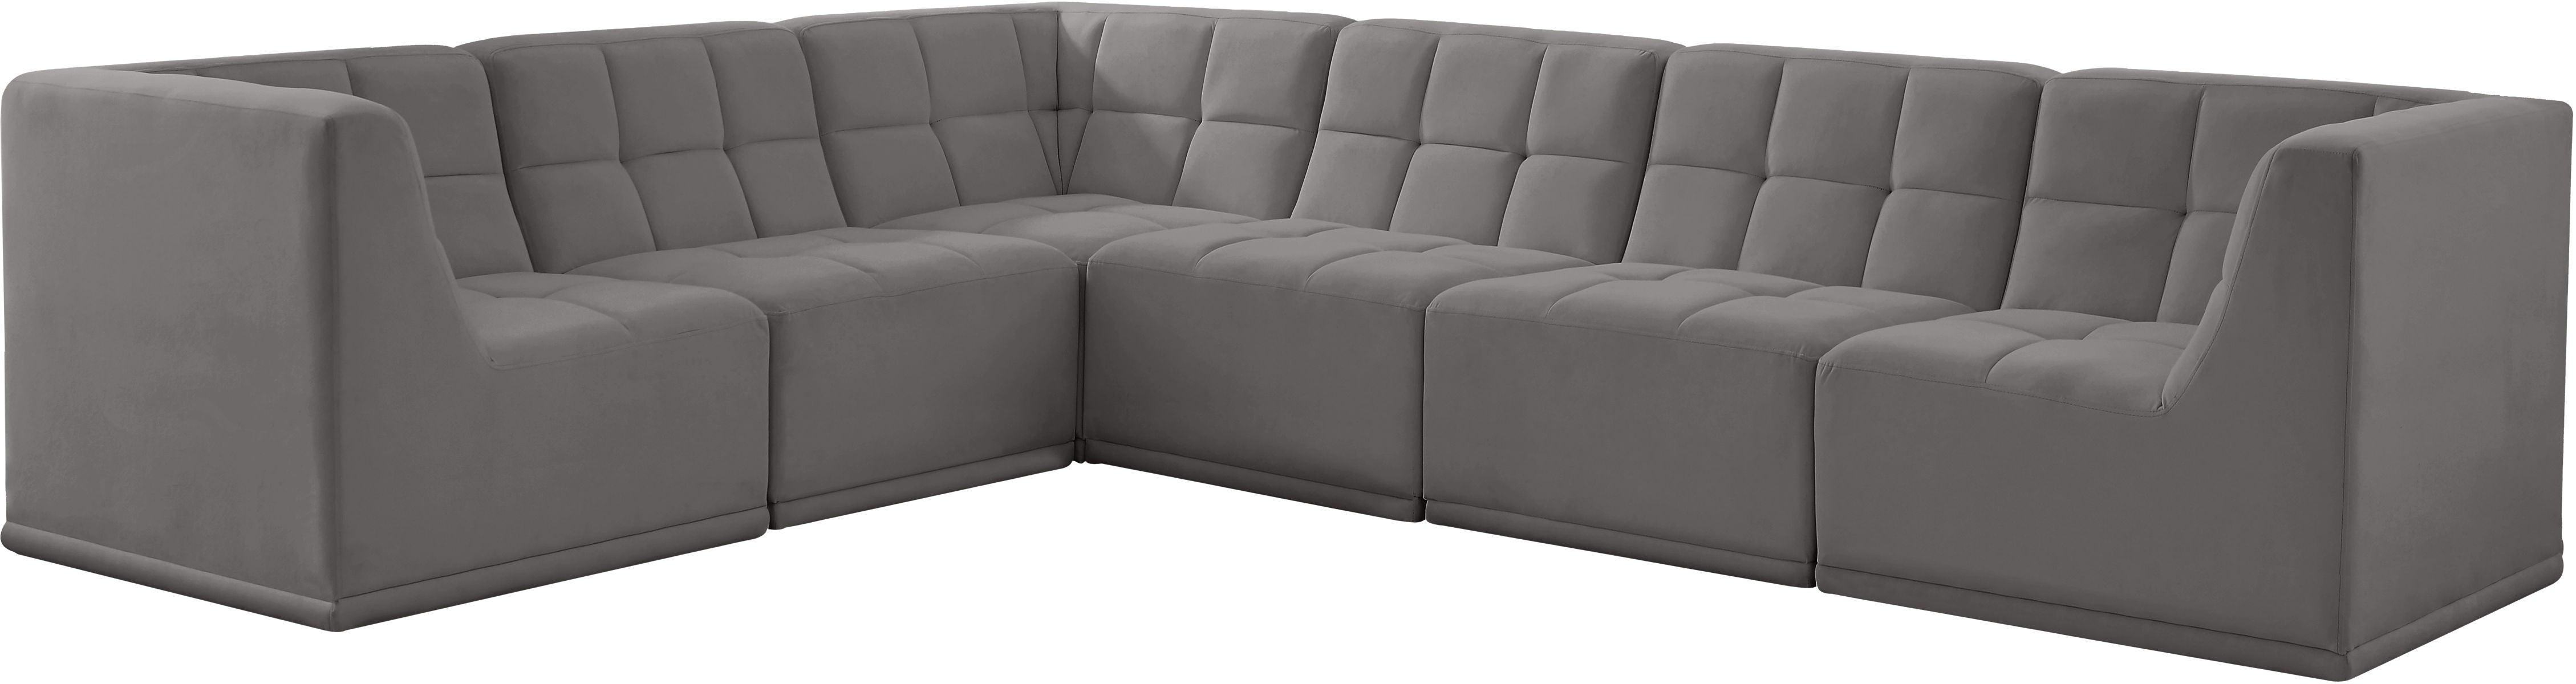 Meridian Furniture - Relax - Modular Sectional 6 Piece - Gray - Fabric - 5th Avenue Furniture